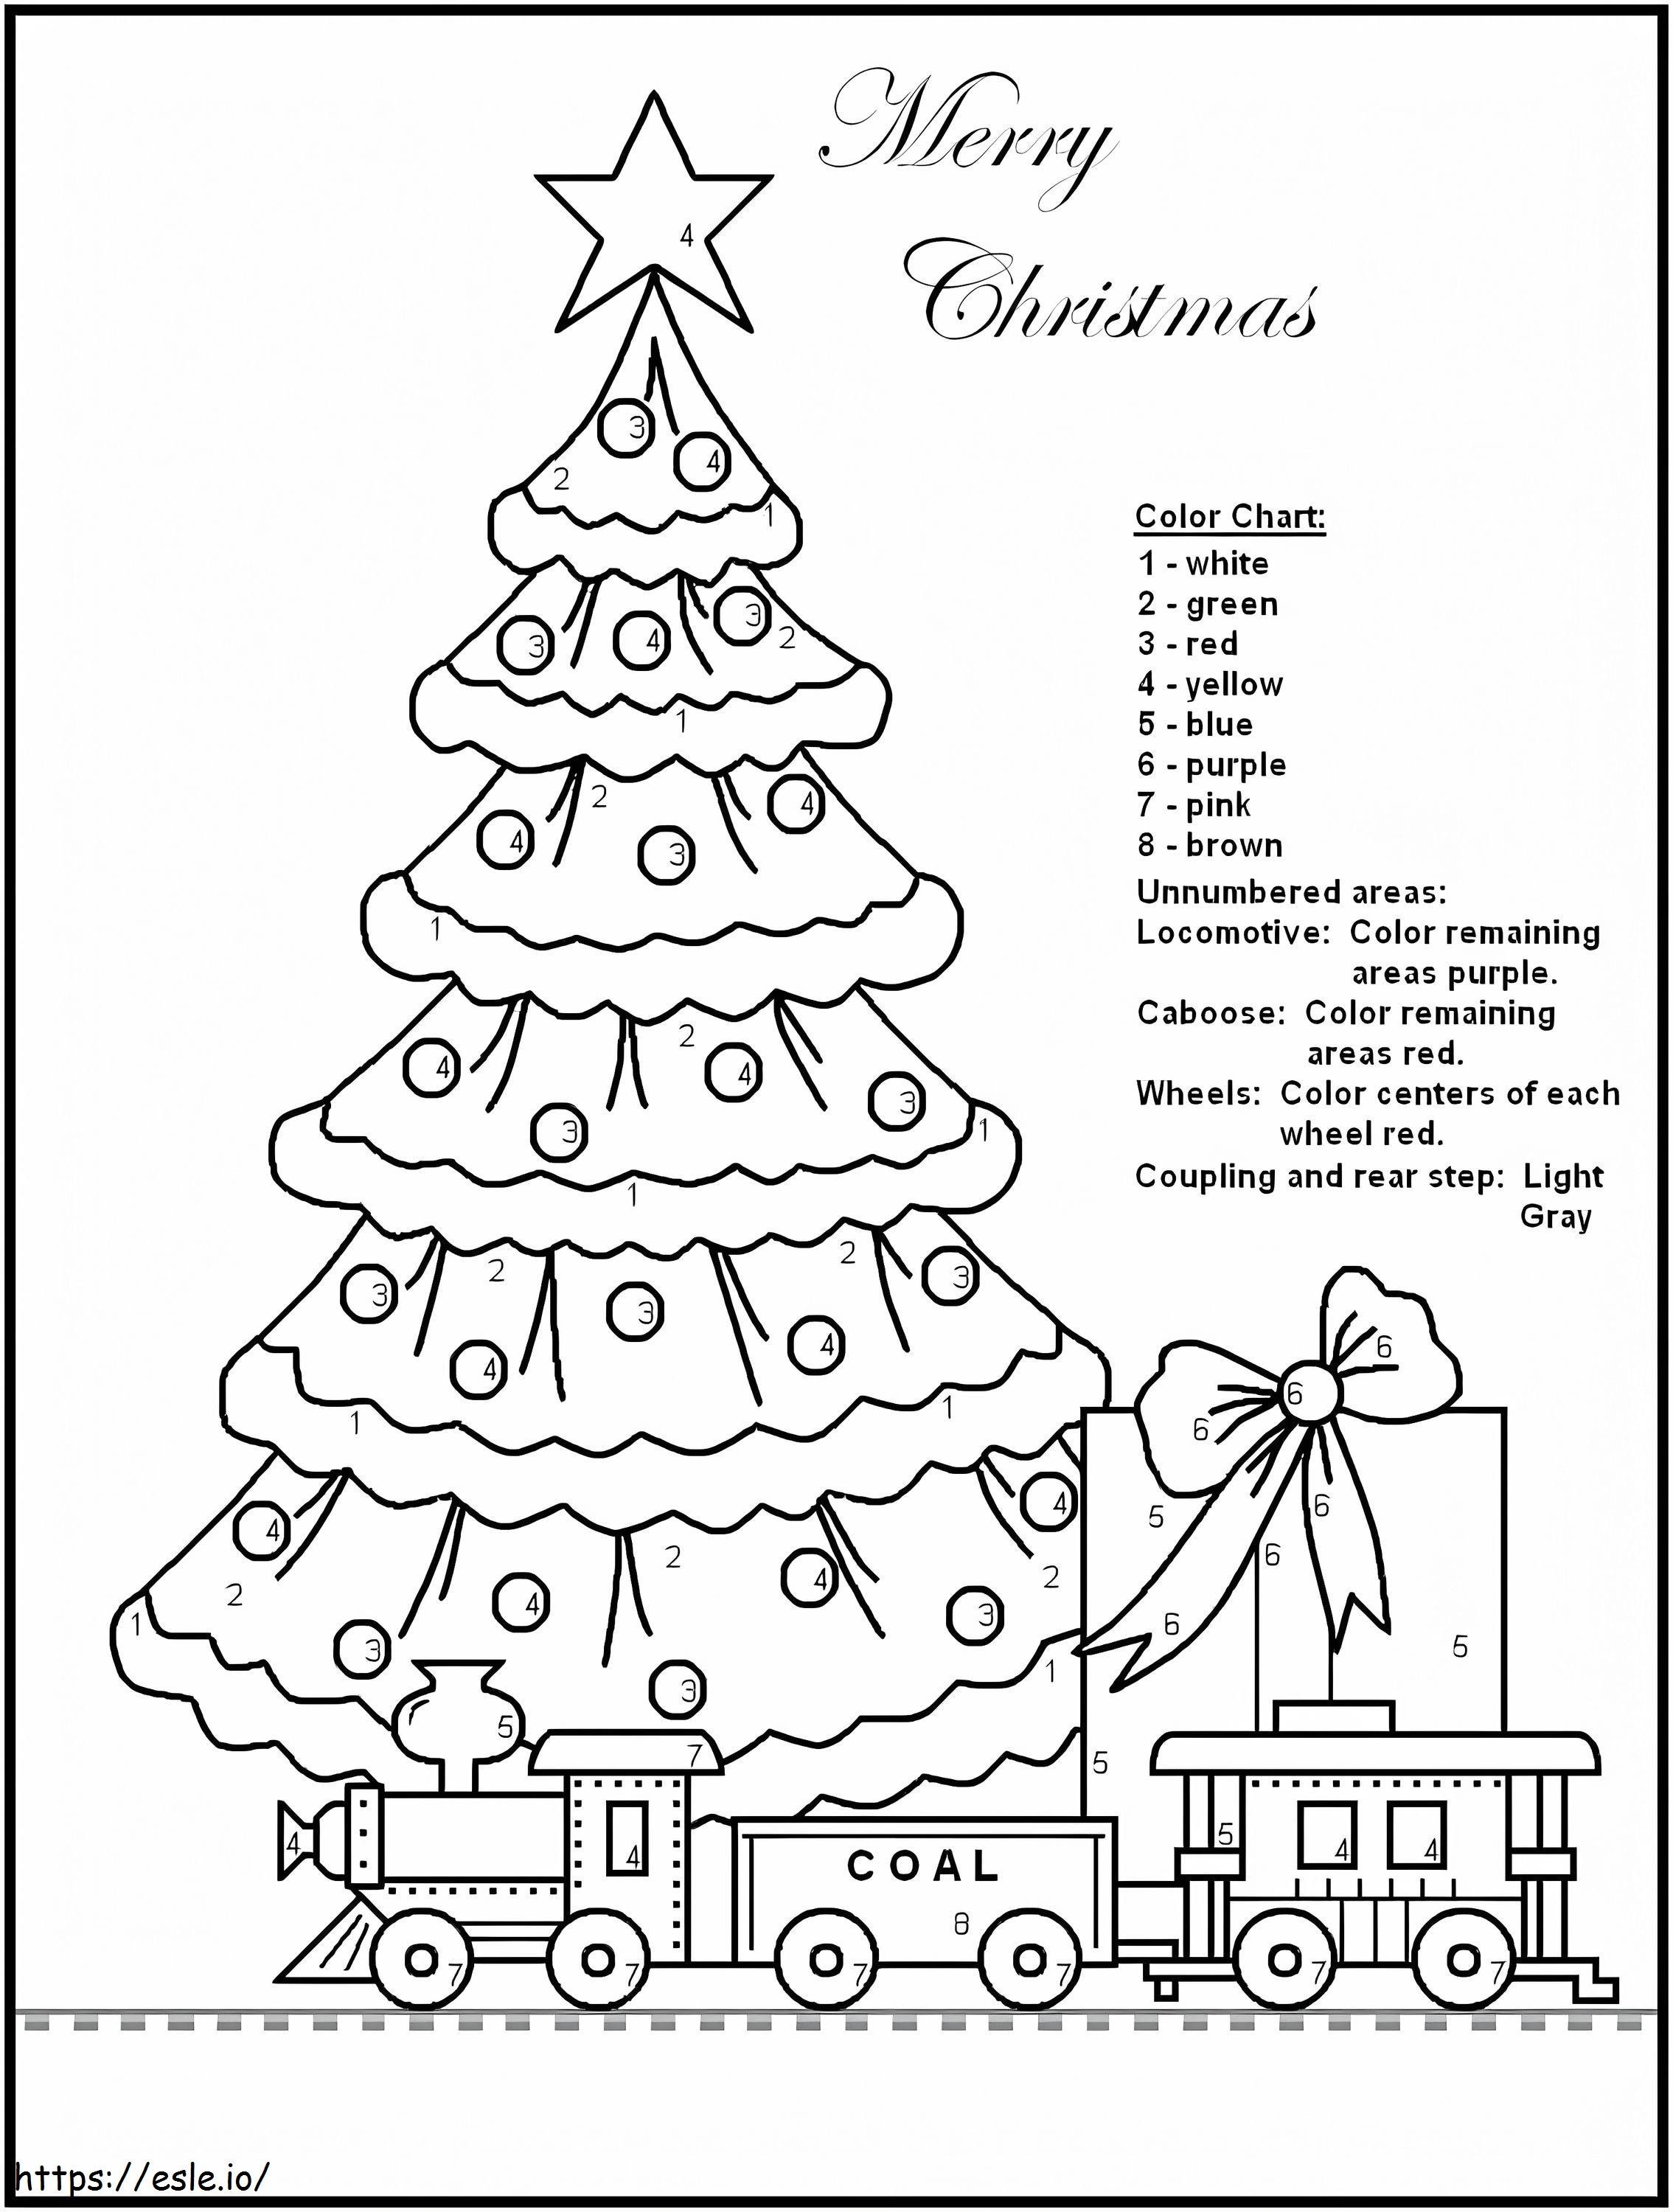 Christmas Tree And Toy Color By Number coloring page